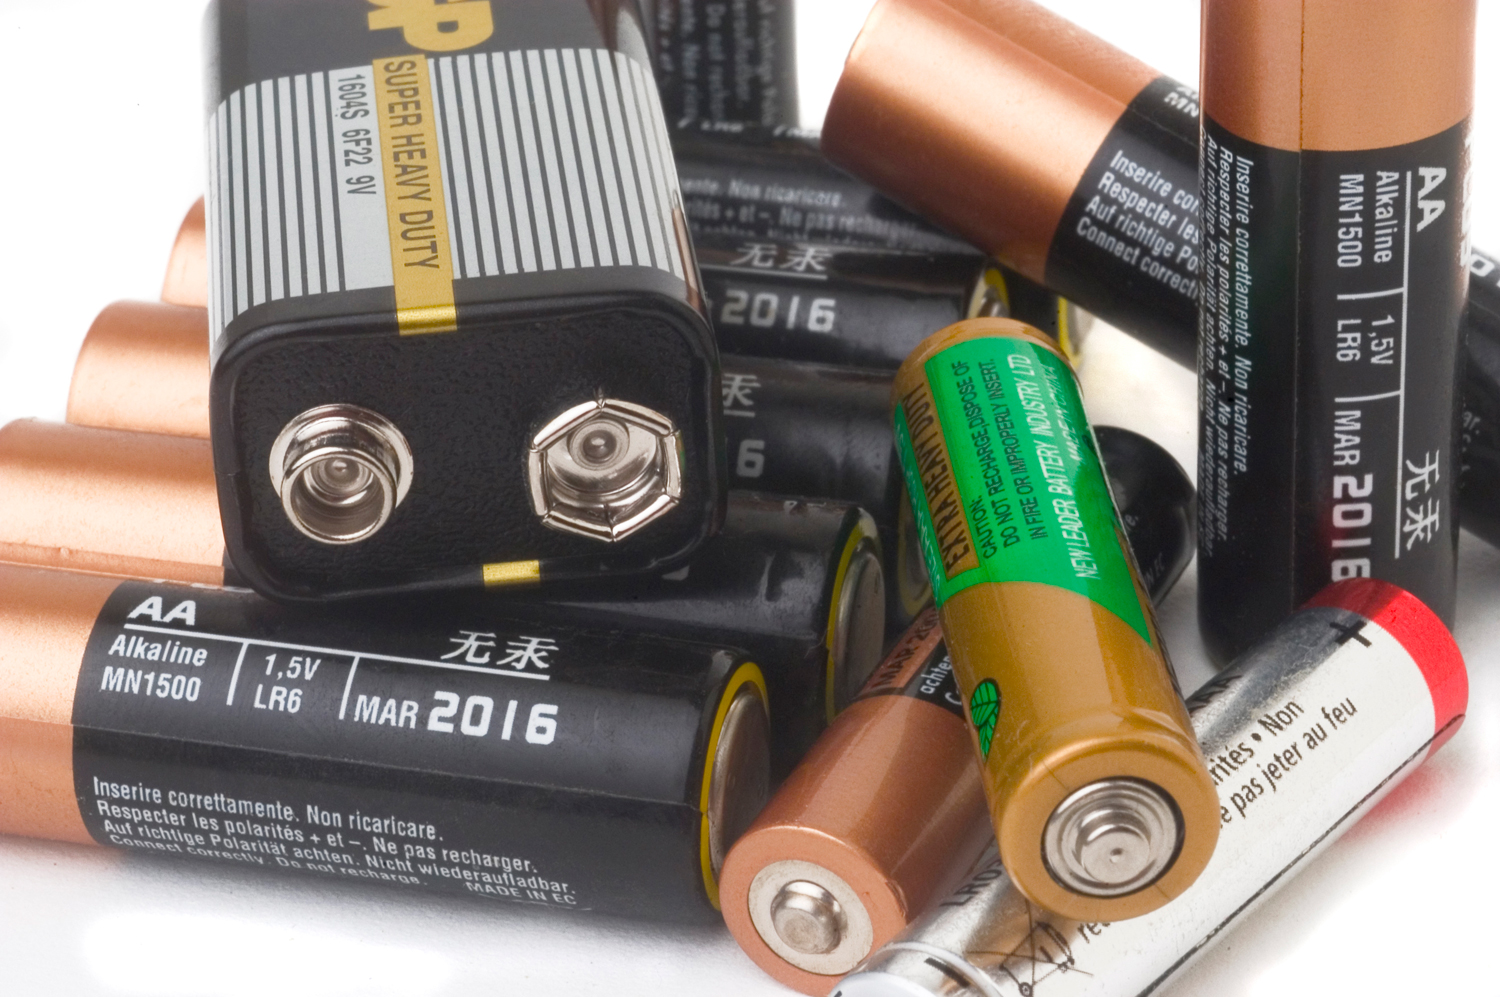 Which one’s best? Not all batteries are created equal